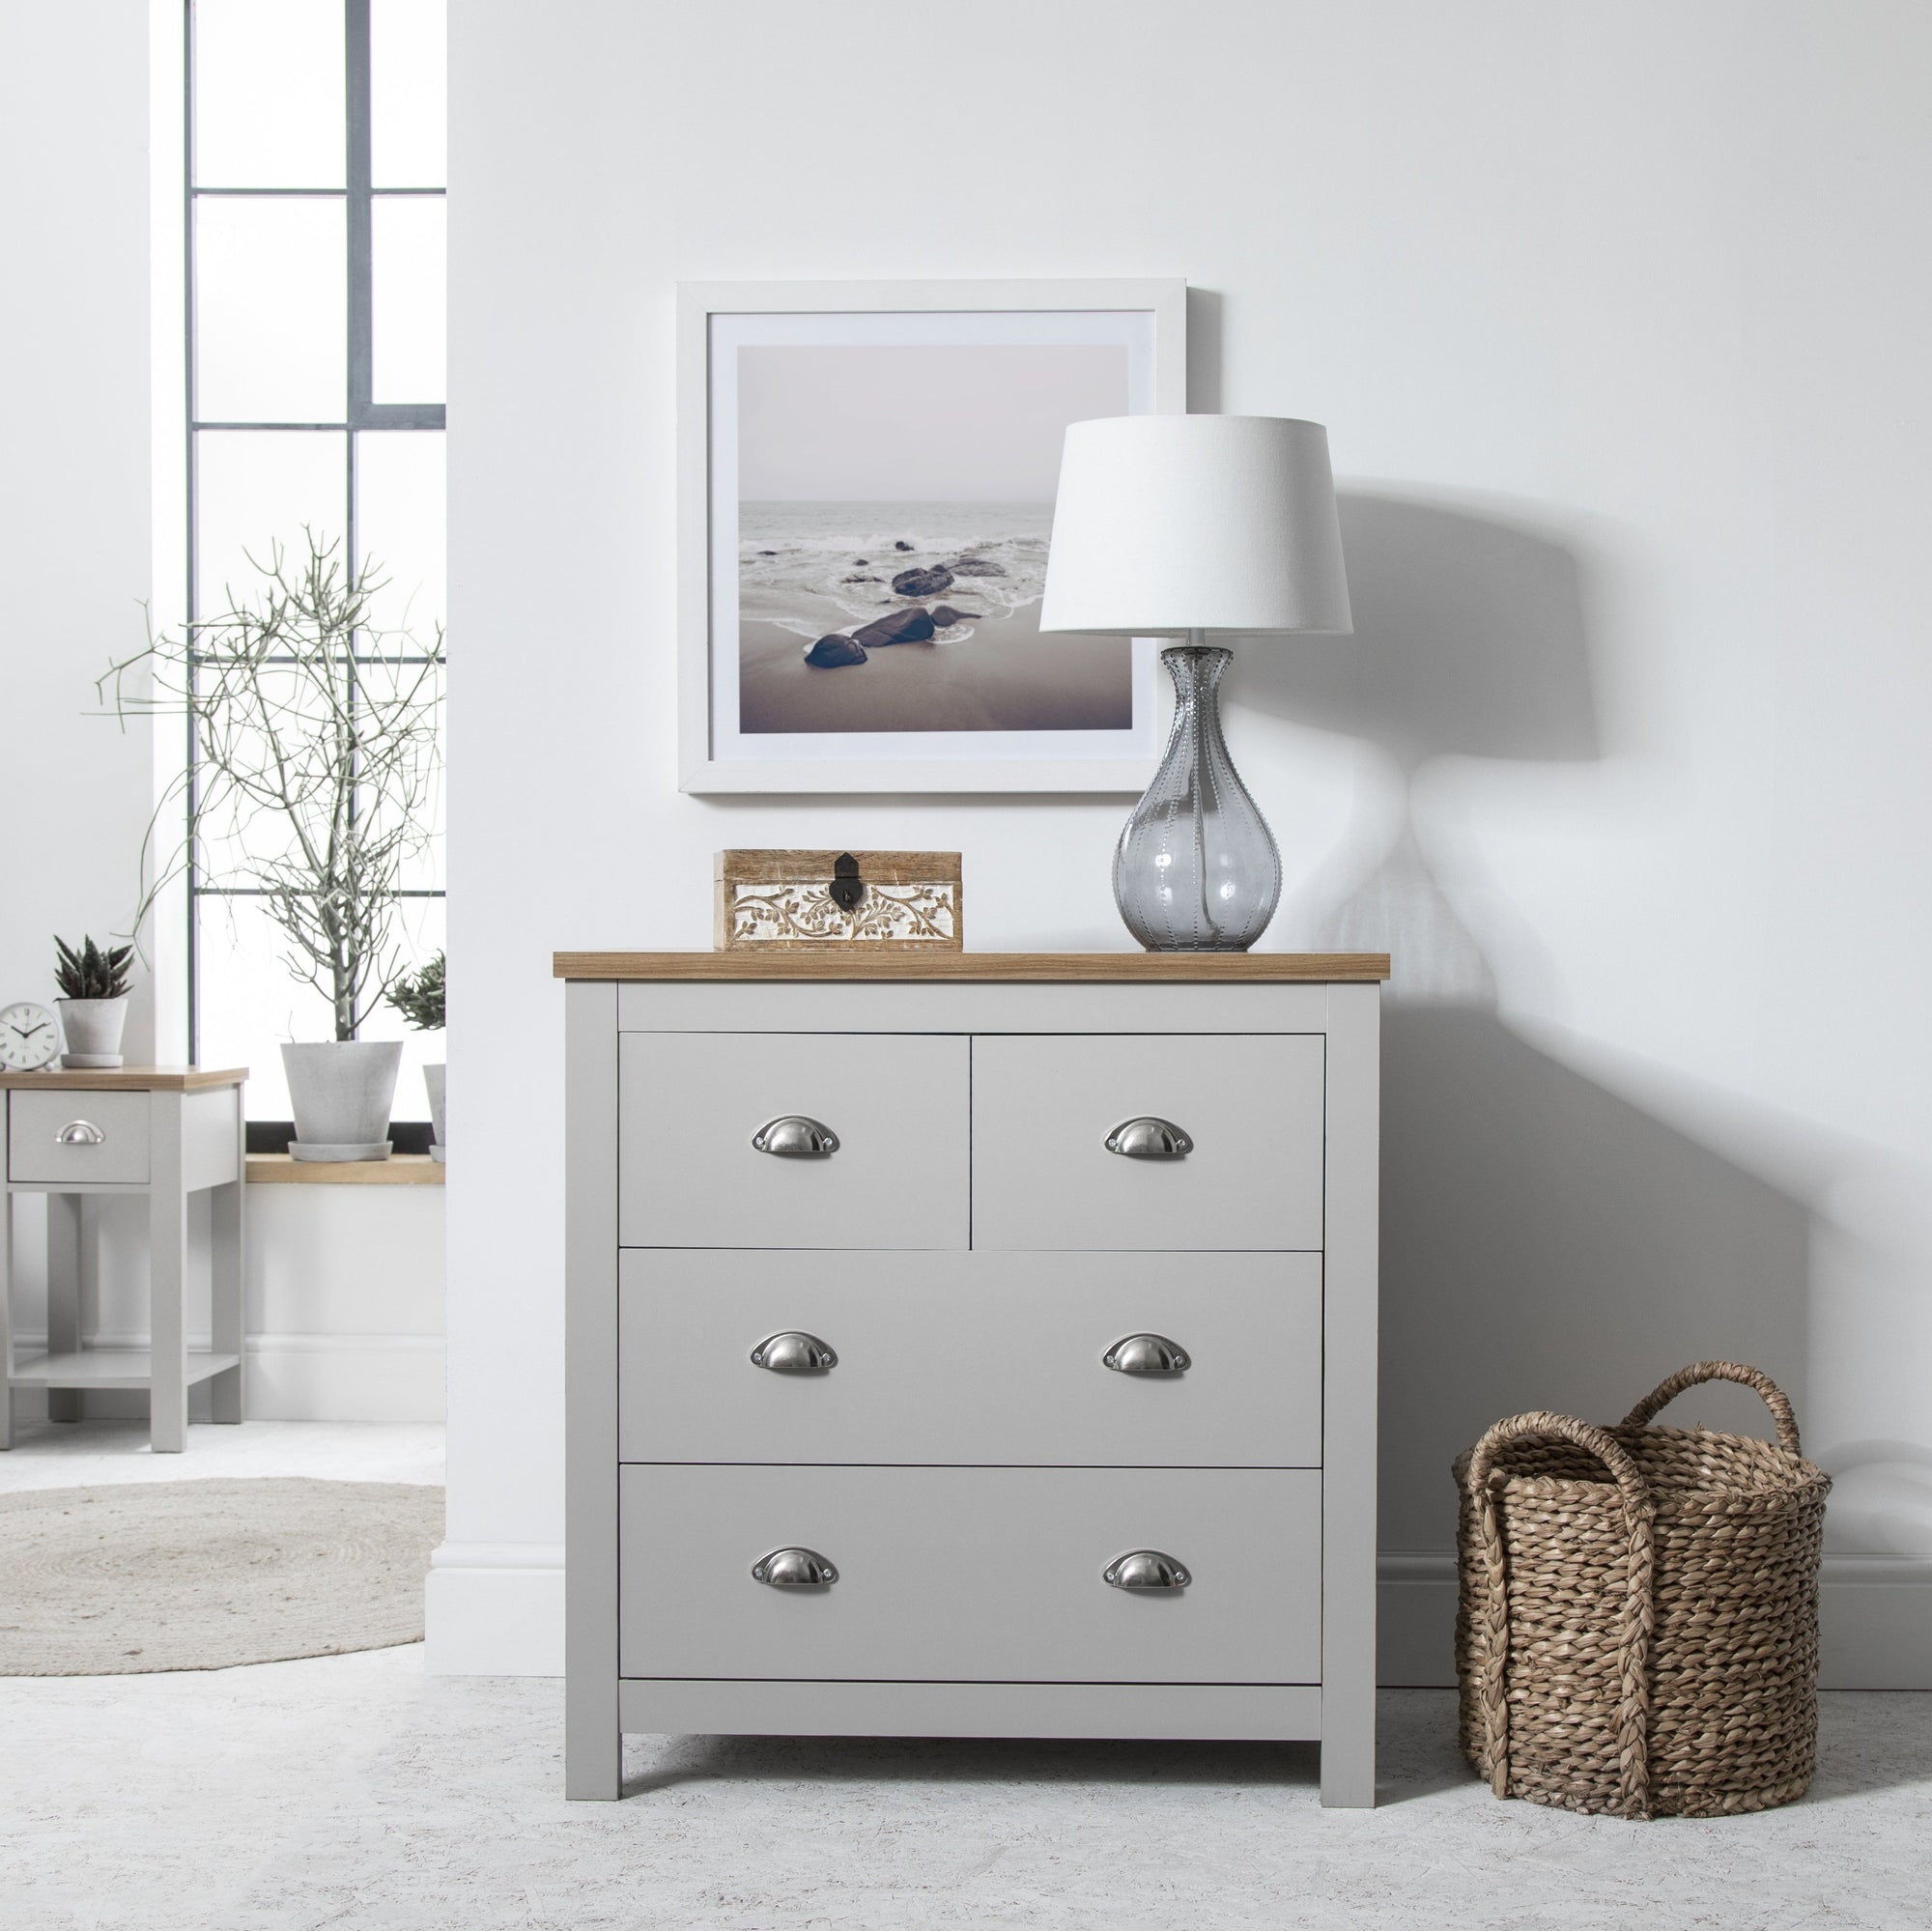 Bampton chest of drawers - 2 over 2 - grey